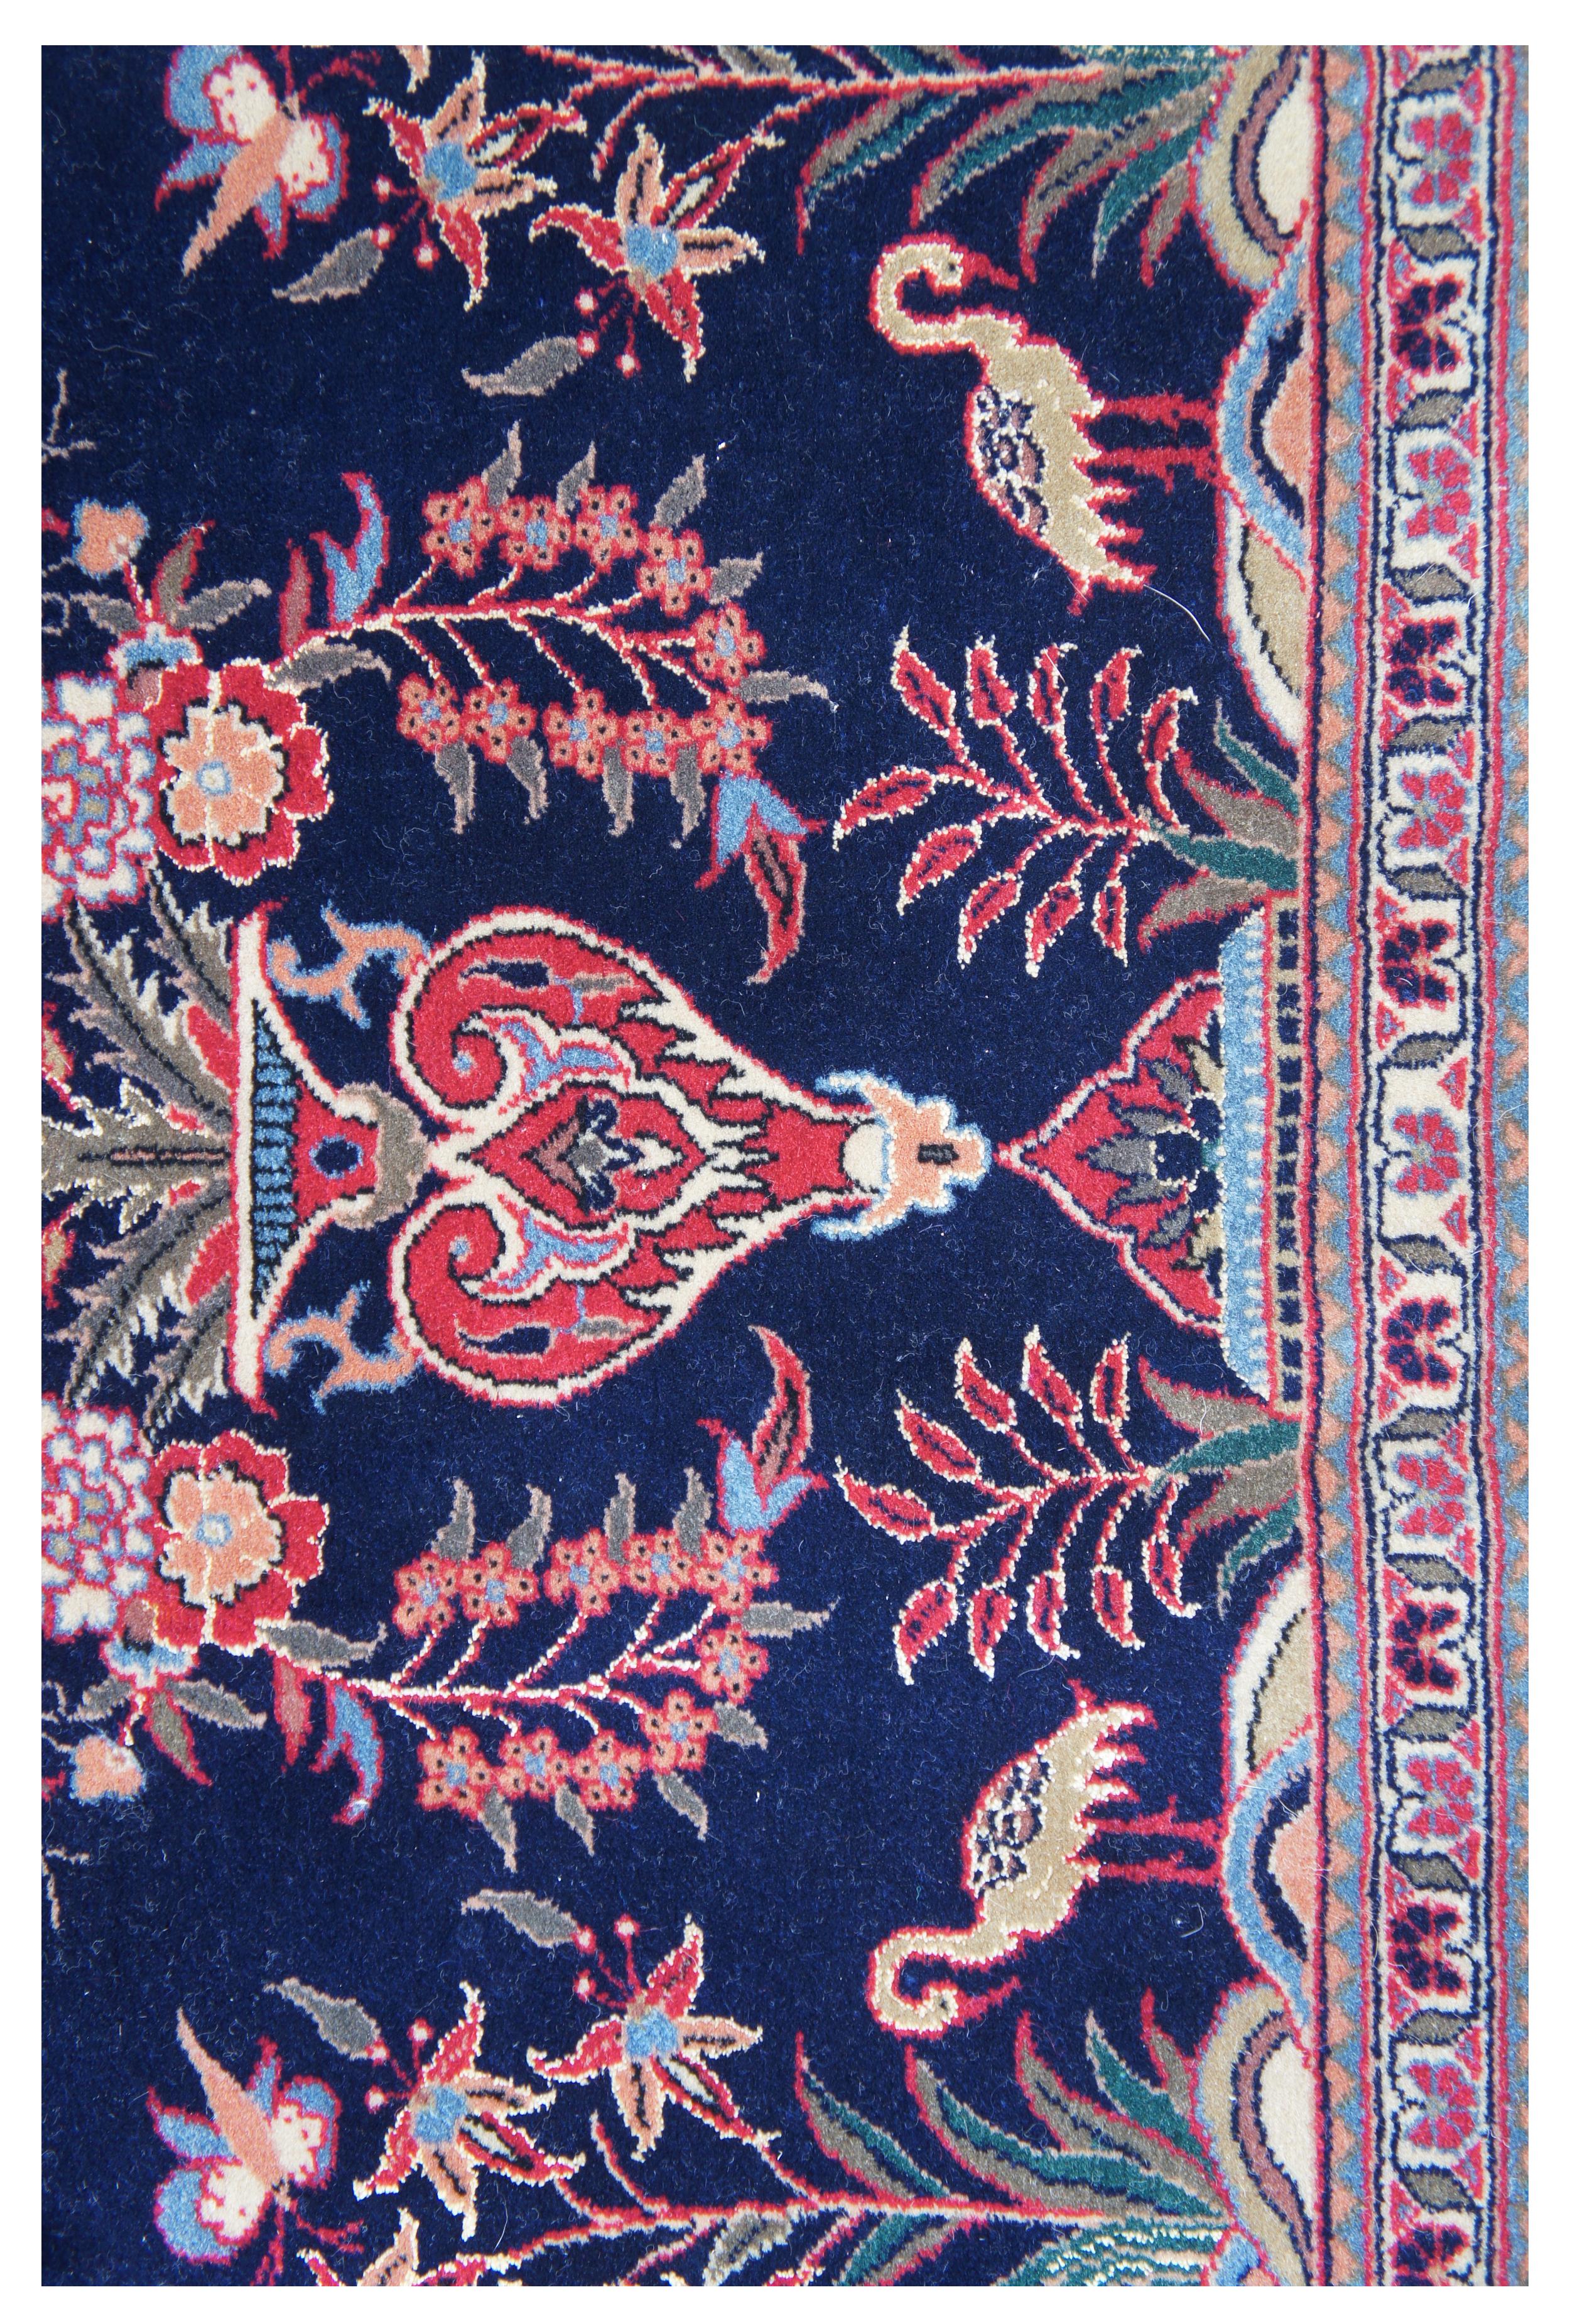 Vintage Persian Oriental vase rug featuring a field of navy blue with a large central vase arrangement of flowers with reds, blues, greens, orange and pink. The piece is accented with butterflies and birds (Flamingo or Stork? / Scissor Tailed